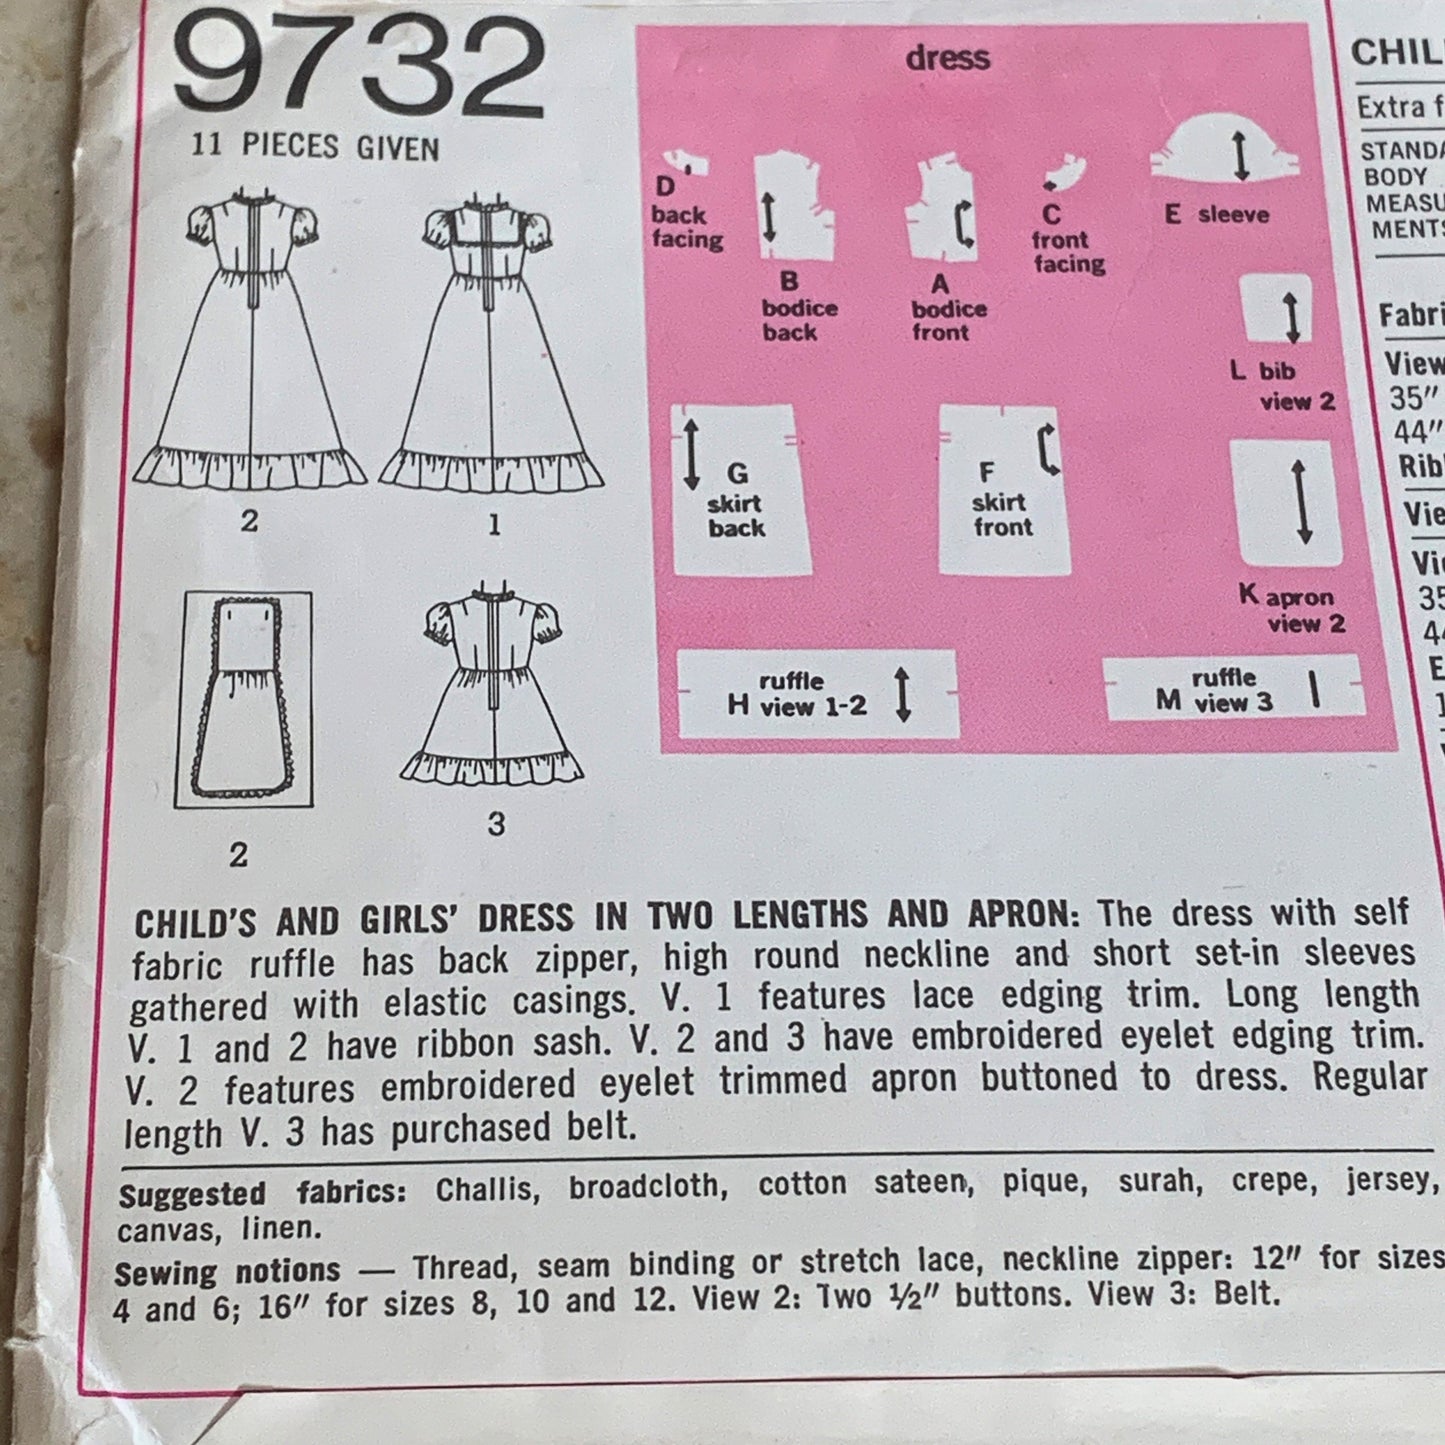 Girl’s Size 10 Dress with Apron 1971 Vintage Sewing Pattern Simplicity 9732